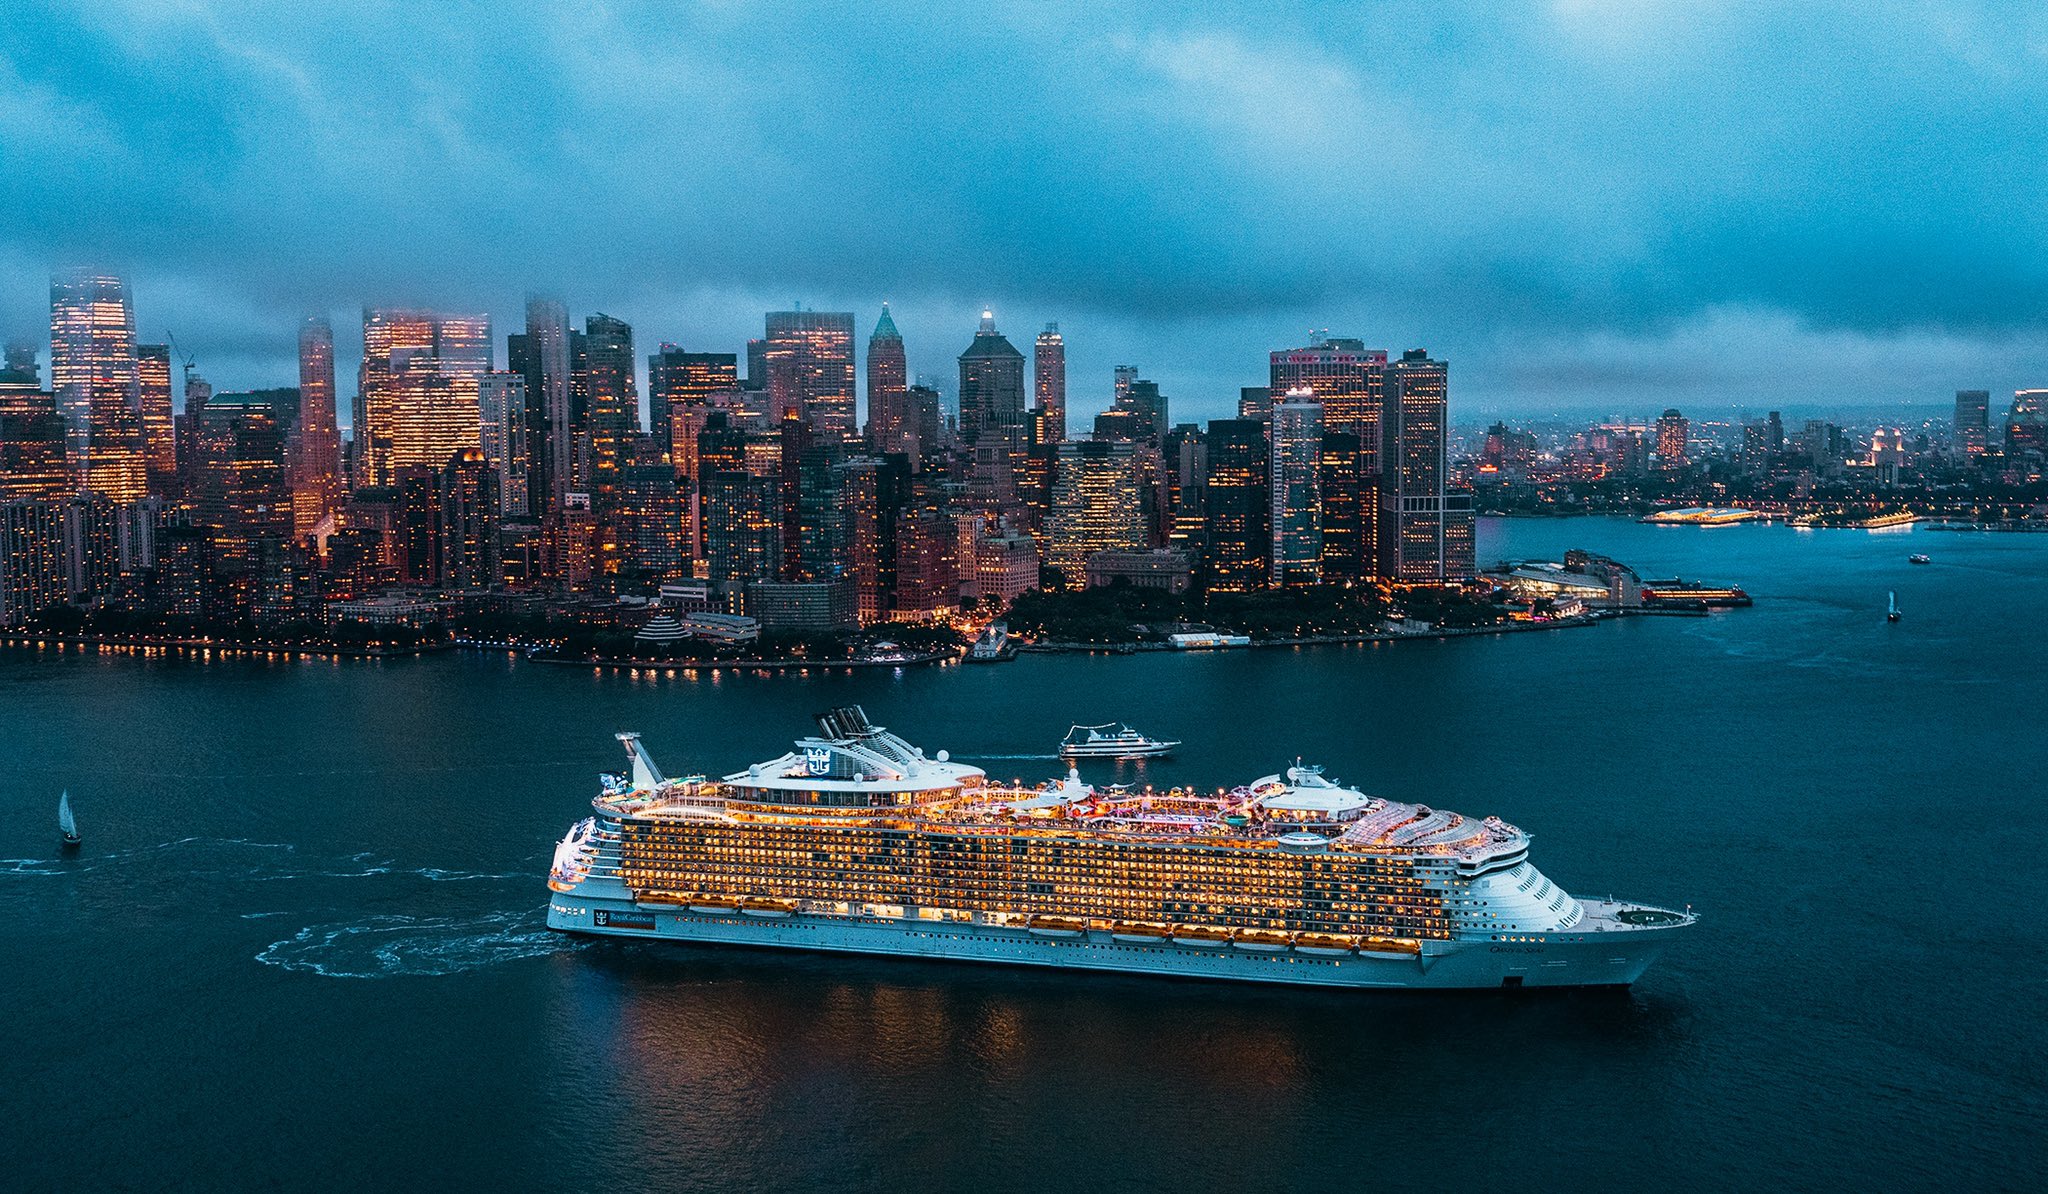 Royal Caribbean gets CDC approval for Oasis of the Seas to sail | Royal Caribbean Blog